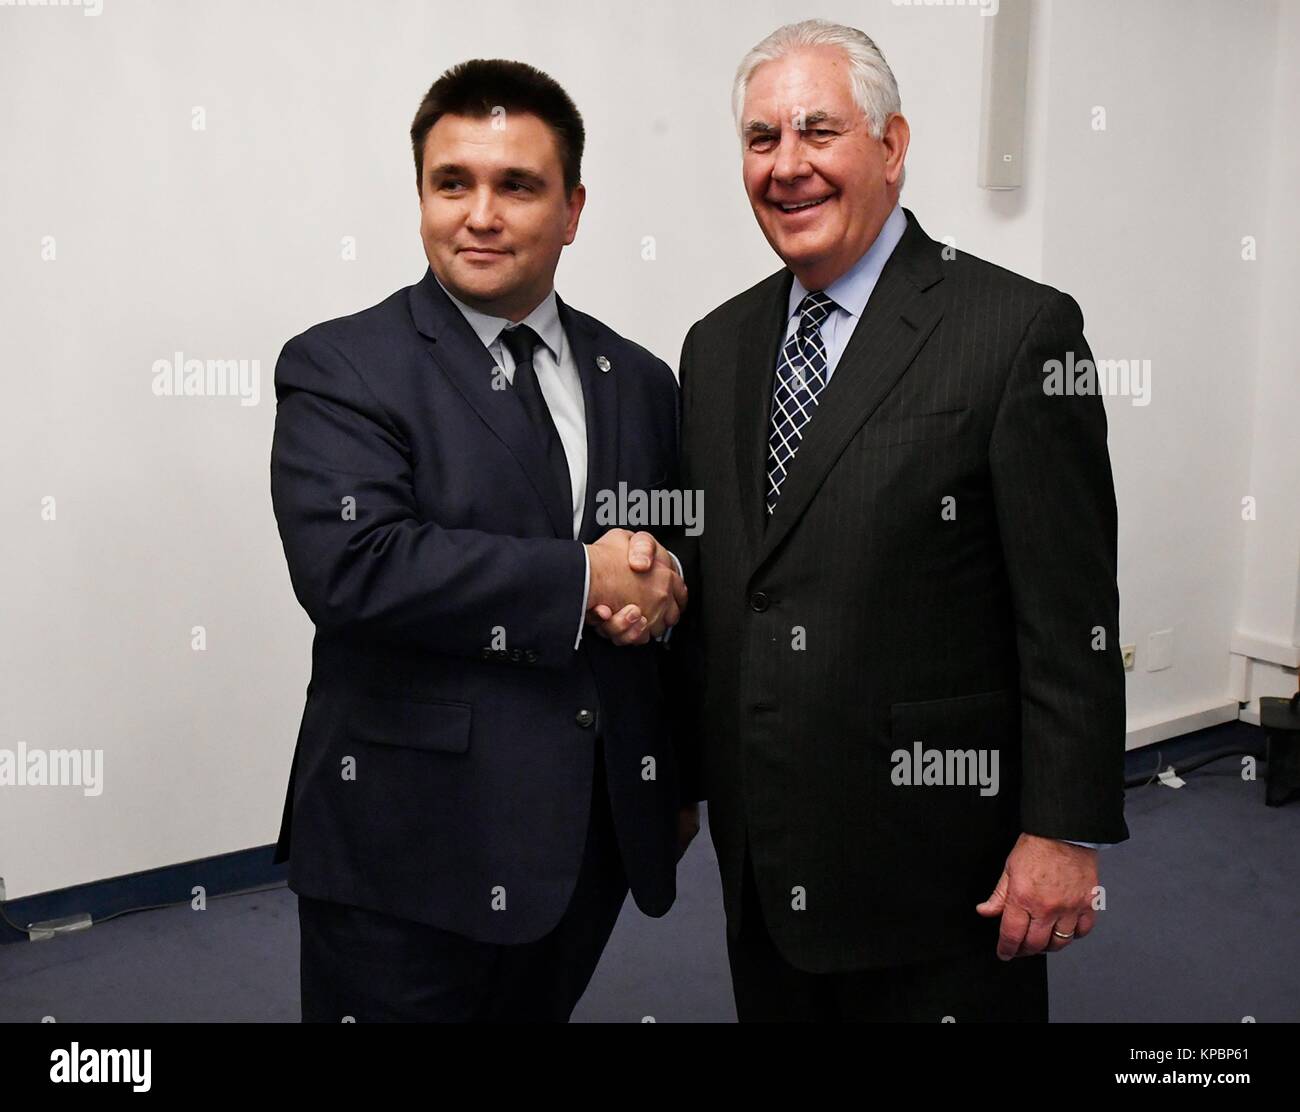 Ukrainian Foreign Minister Pavlo Klimkin (left) meets with U.S. Secretary of State Rex Tillerson during the Organization for Security and Co-operation in Europe (OSCE) Ministerial Council December 7, 2017 in Vienna, Austria. Stock Photo